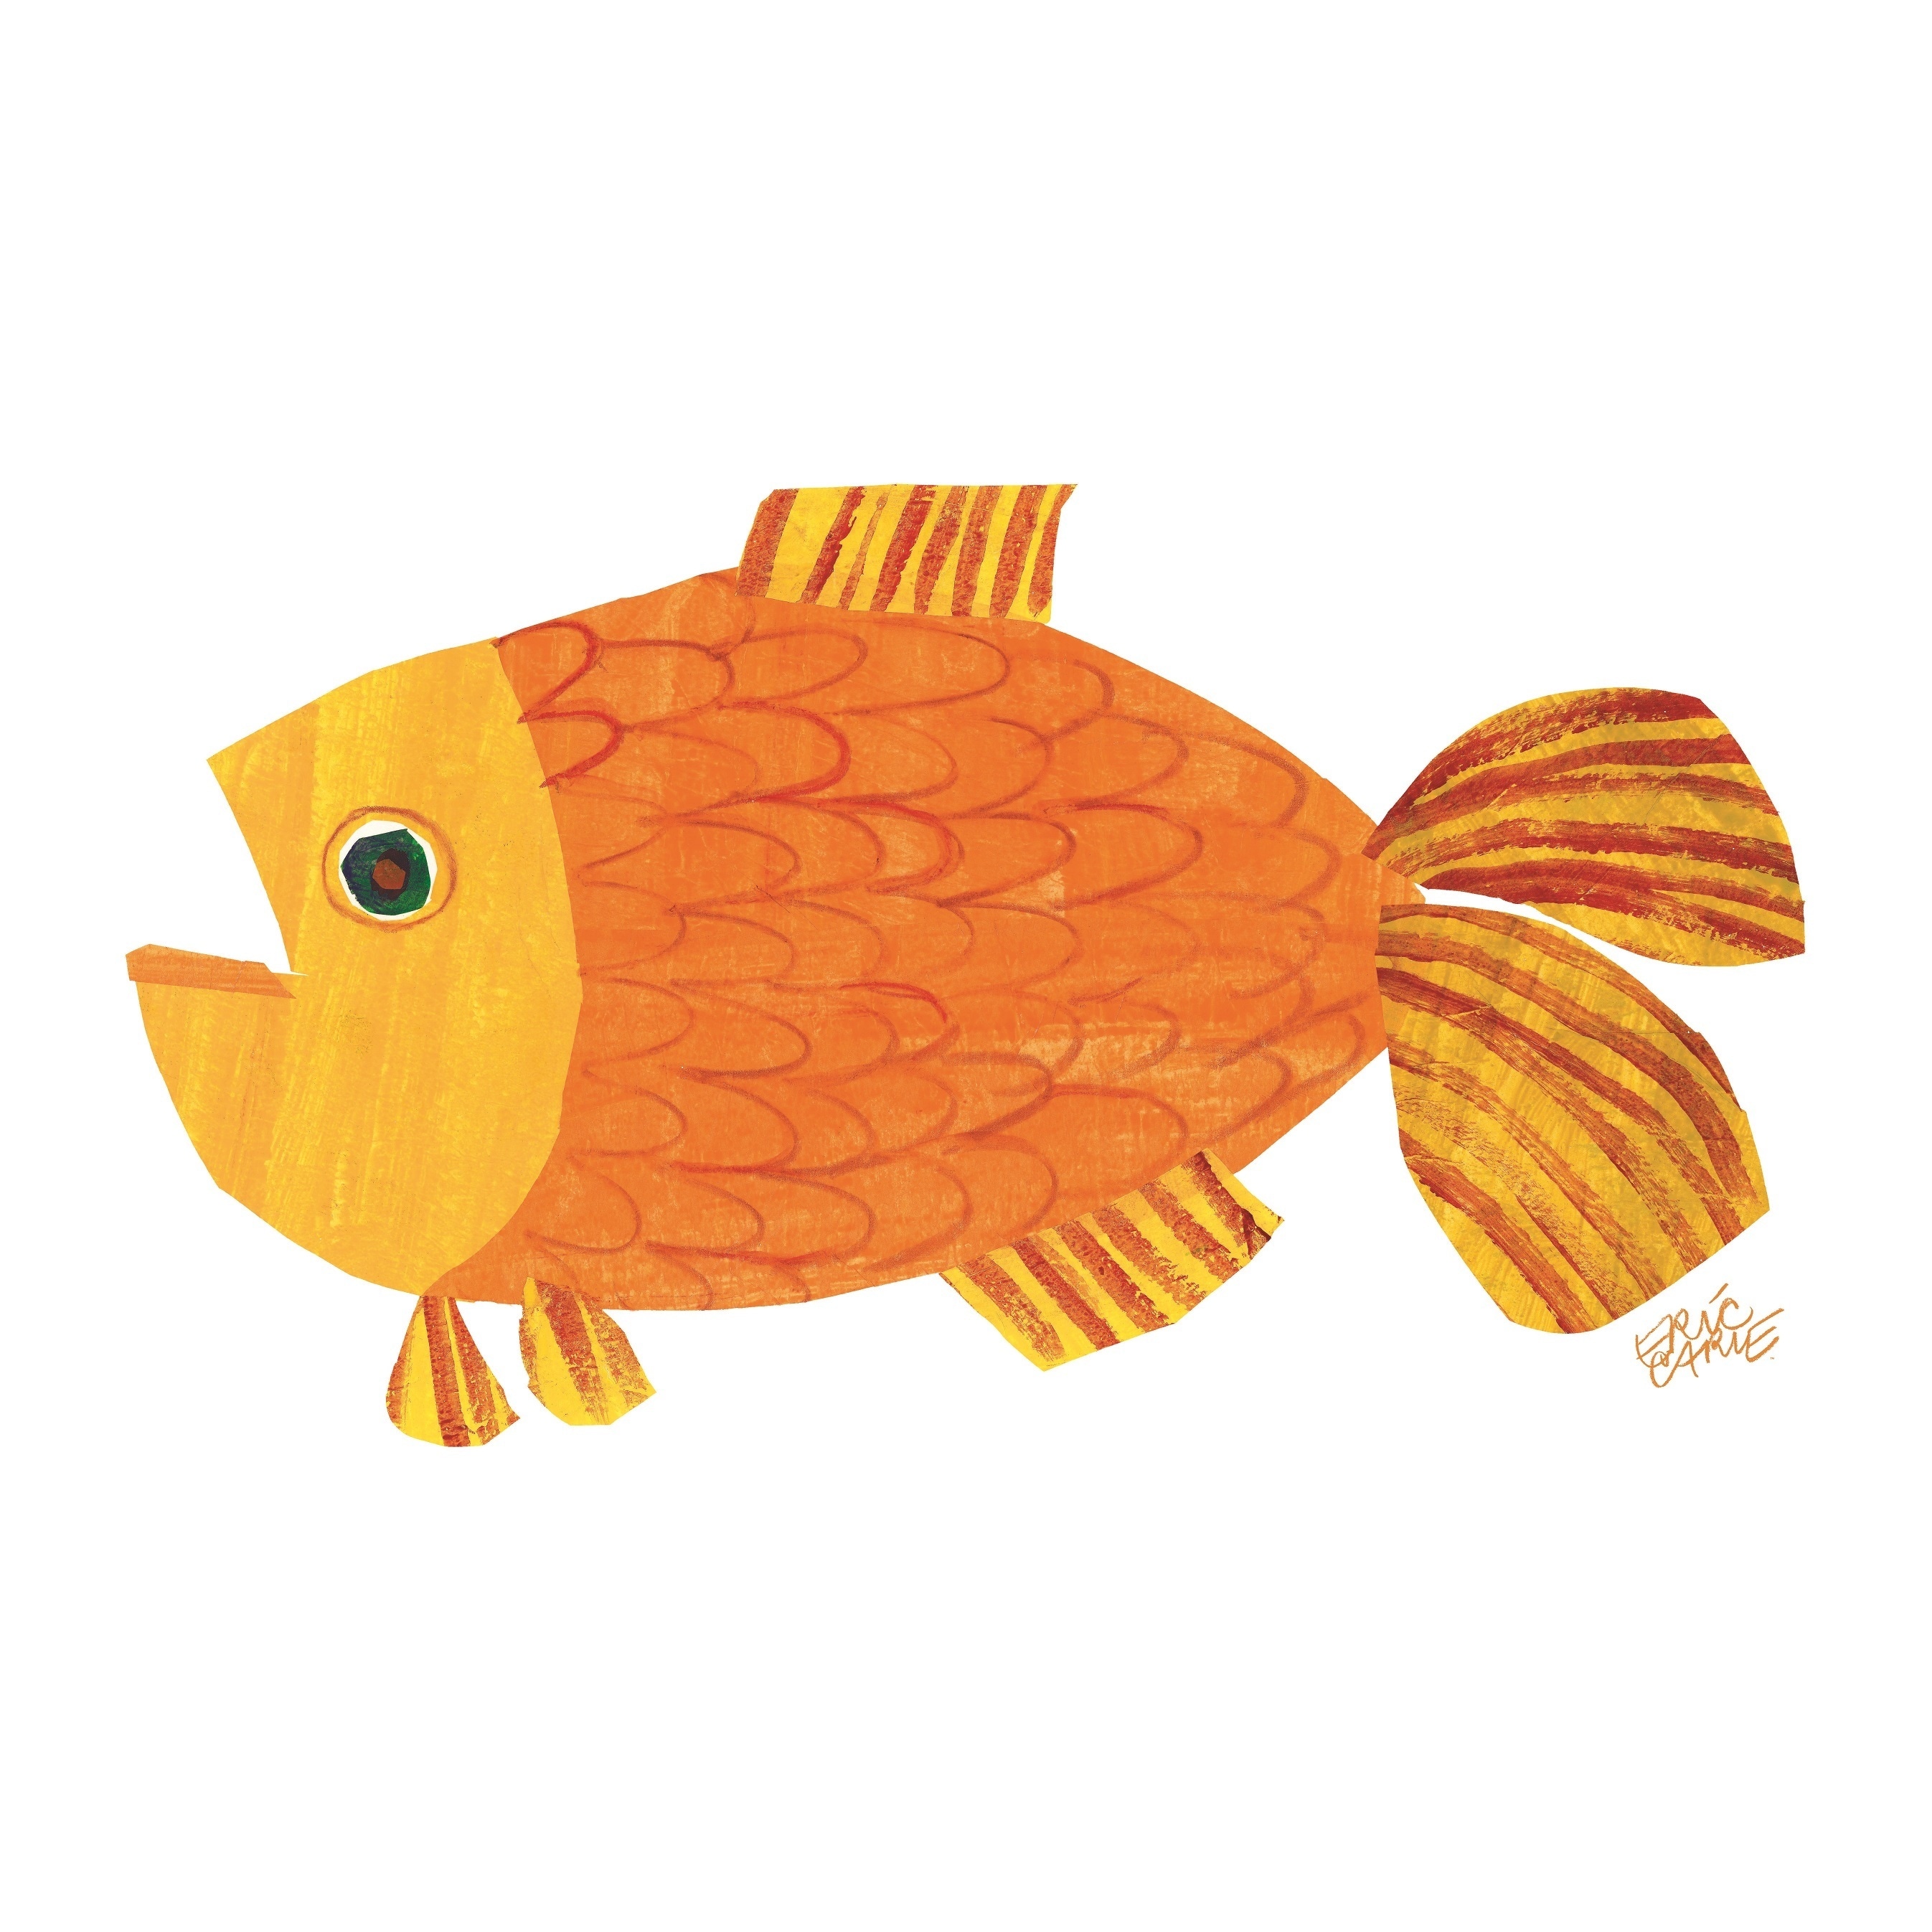 Brown Bear Character Art Goldfish by Eric Carle Multi color Free Shipping Today Overstock